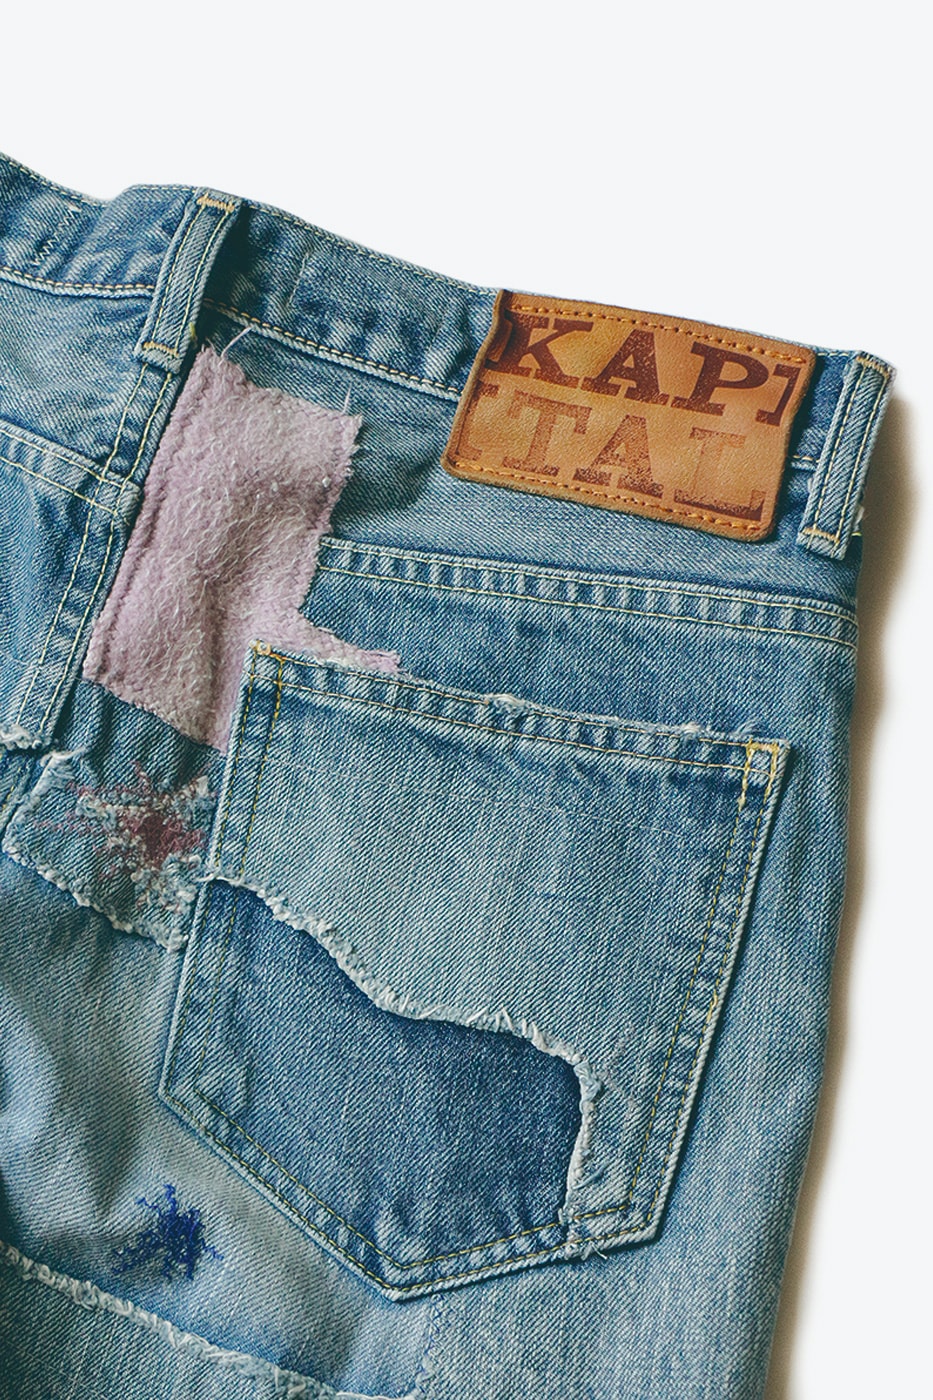 KAPITAL 14oz OKABILLY Gypsy Patch Remake Denim Release Japanese fashion menswear streetwear patchwork cotton jeans pants trousers smiley flower embroidery washed 